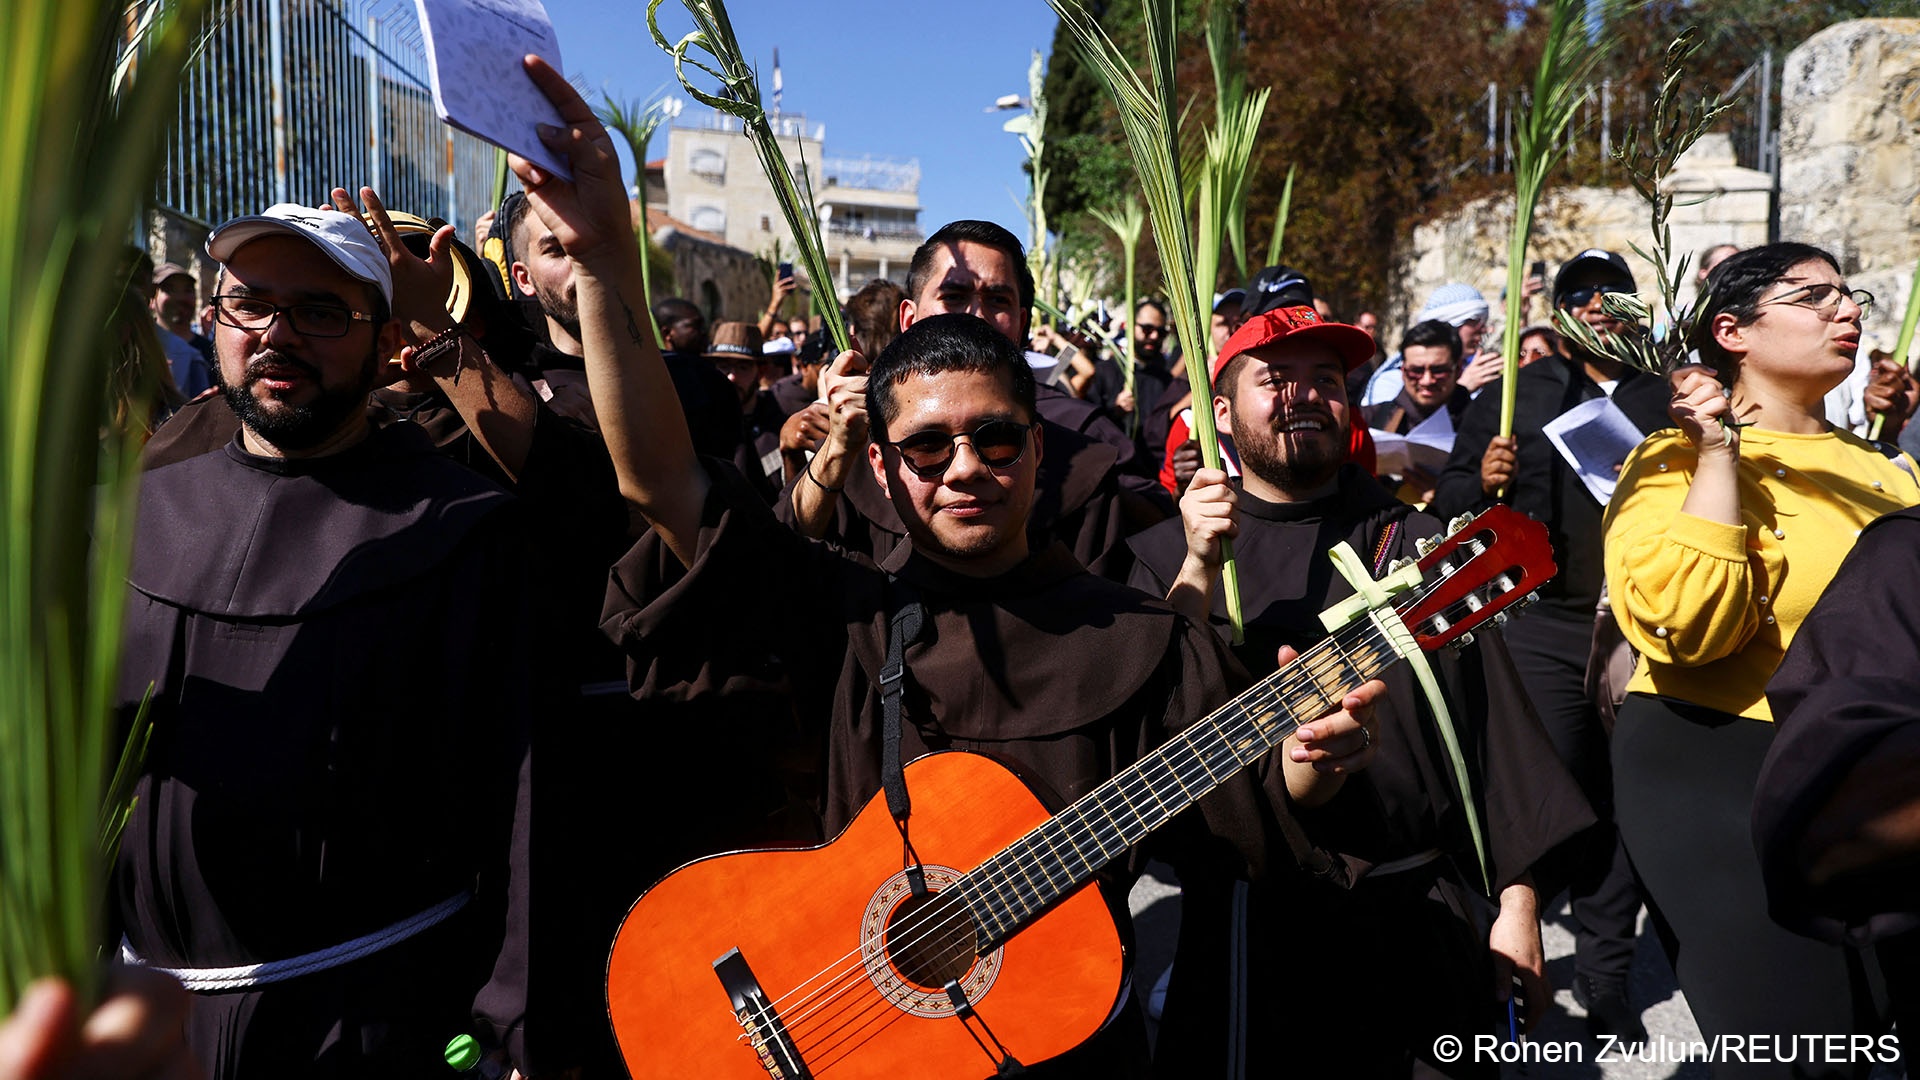 Christian worshippers play instruments as they attend a Palm Sunday procession on the Mount of Olives in Jerusalem, 2 April 2023 (image: REUTERS/Ronen Zvulun)